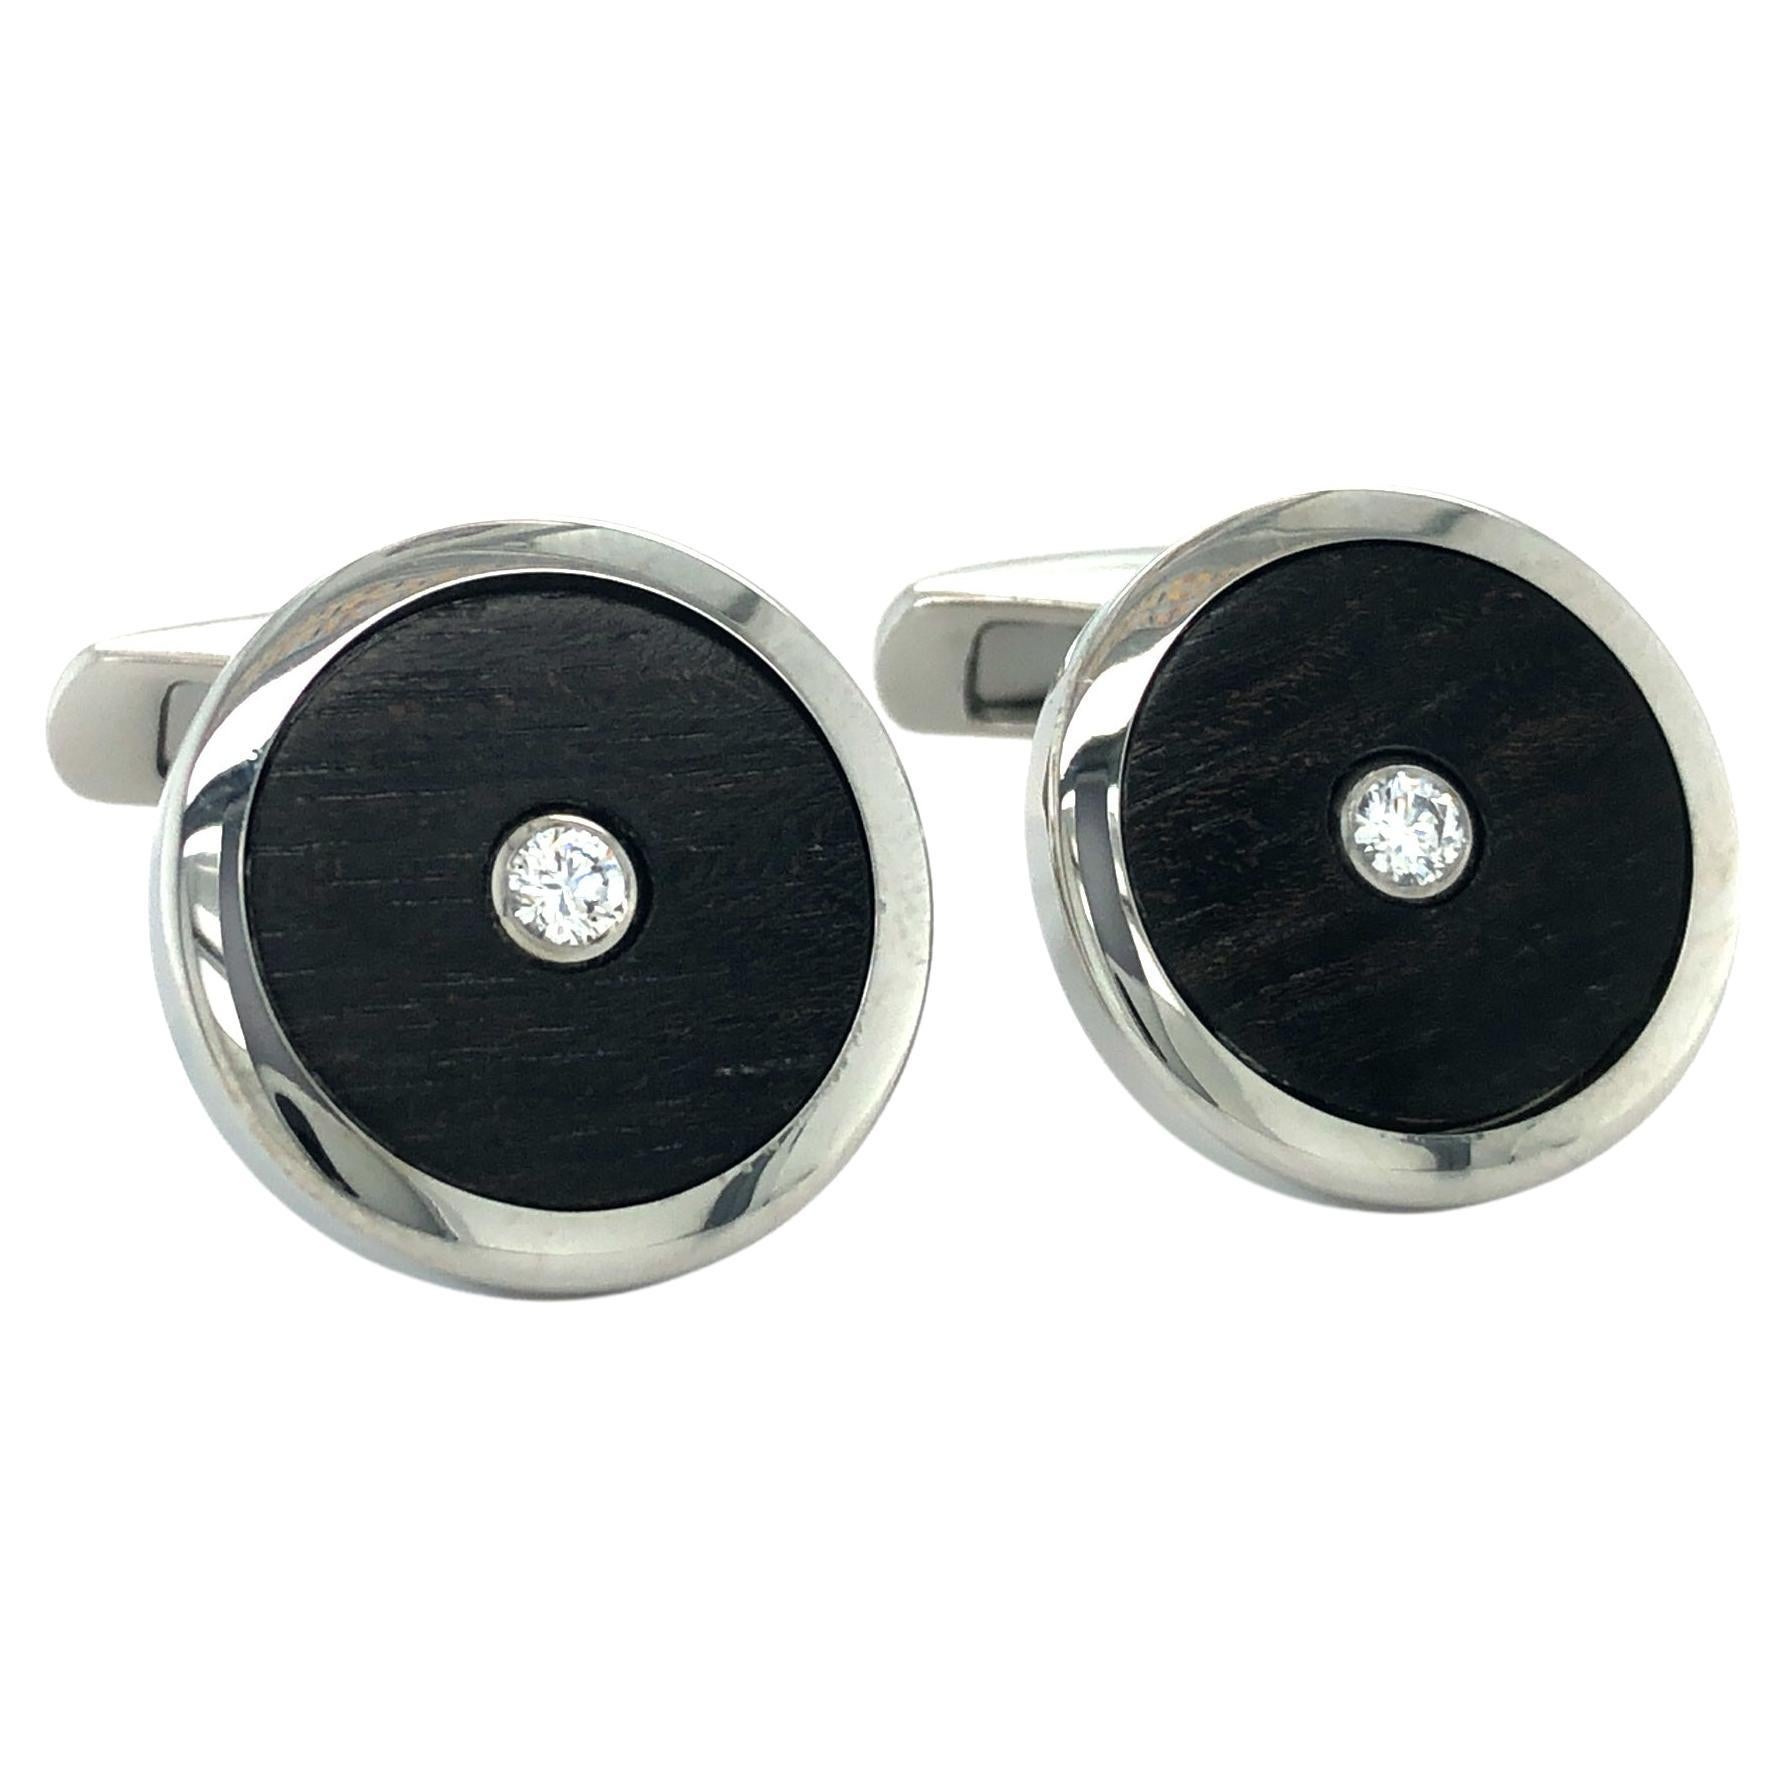 Victor Mayer round stainless steel cufflinks, Hallmark Collection, precious wood inlays, 2 brilliant-cut diamonds total 0.2 ct, H VS, diameter 19 mm 

From VICTOR MAYER's Hallmark Collection, these stainless steel cufflinks epitomize timeless